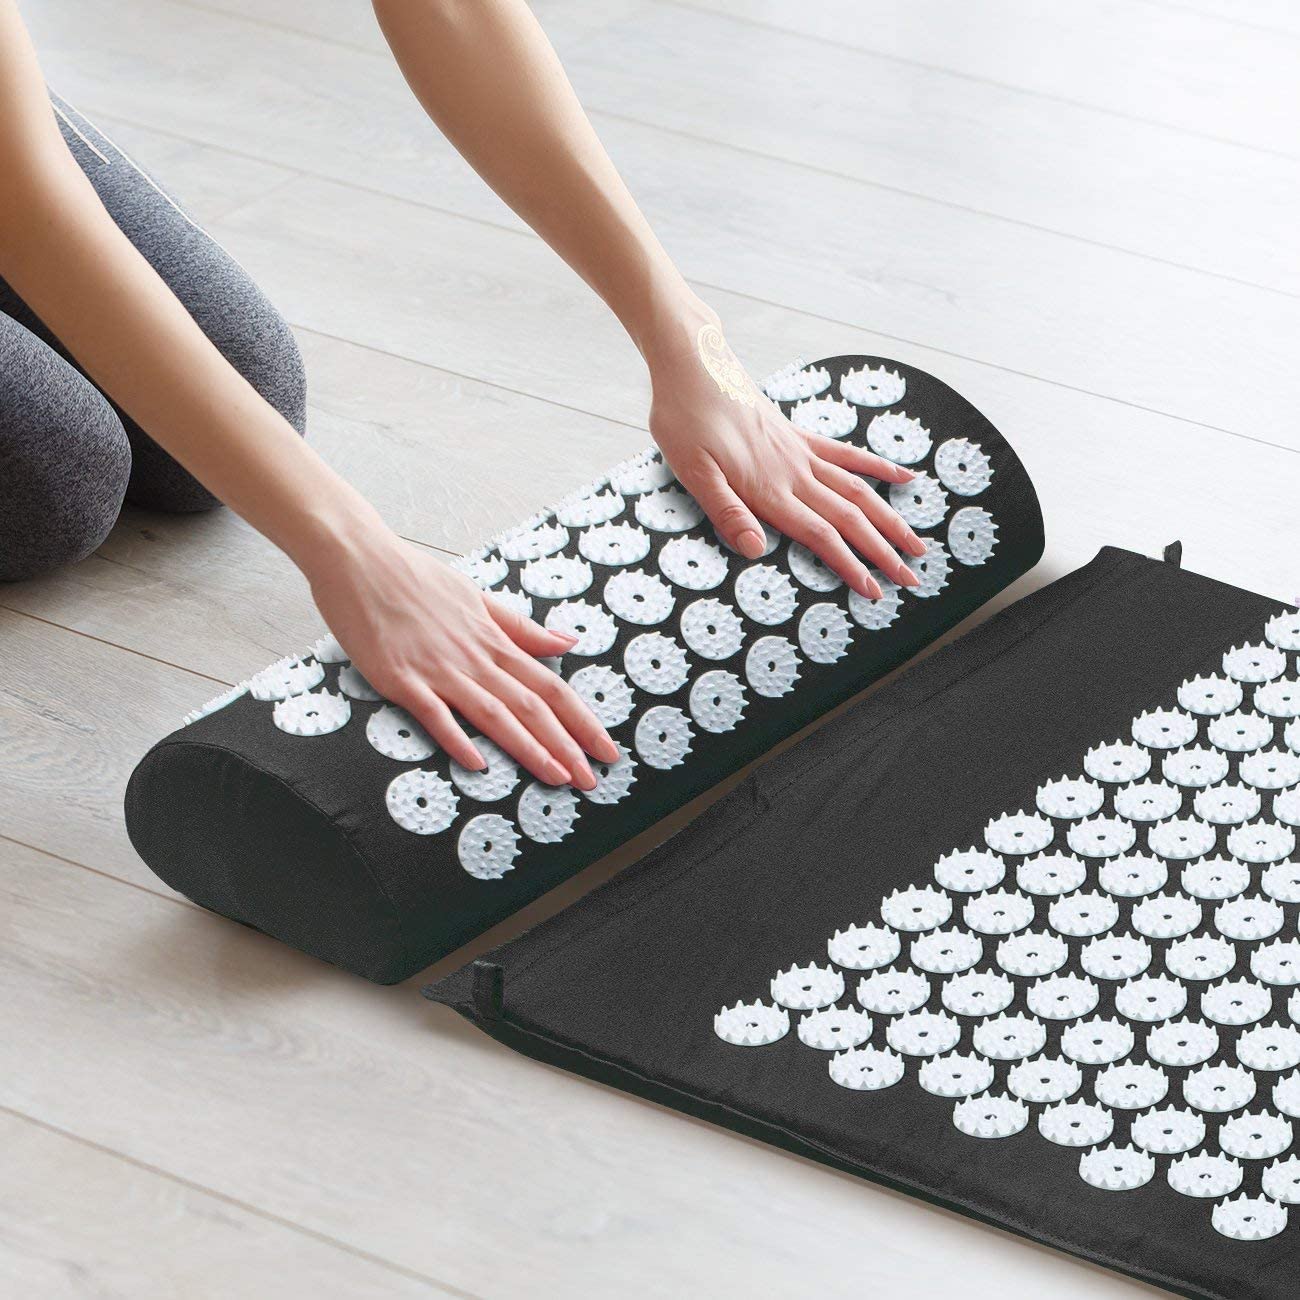 Sivan Health And Fitness Deluxe Acupressure Mat & Pillow Combo Set, Green - image 4 of 7